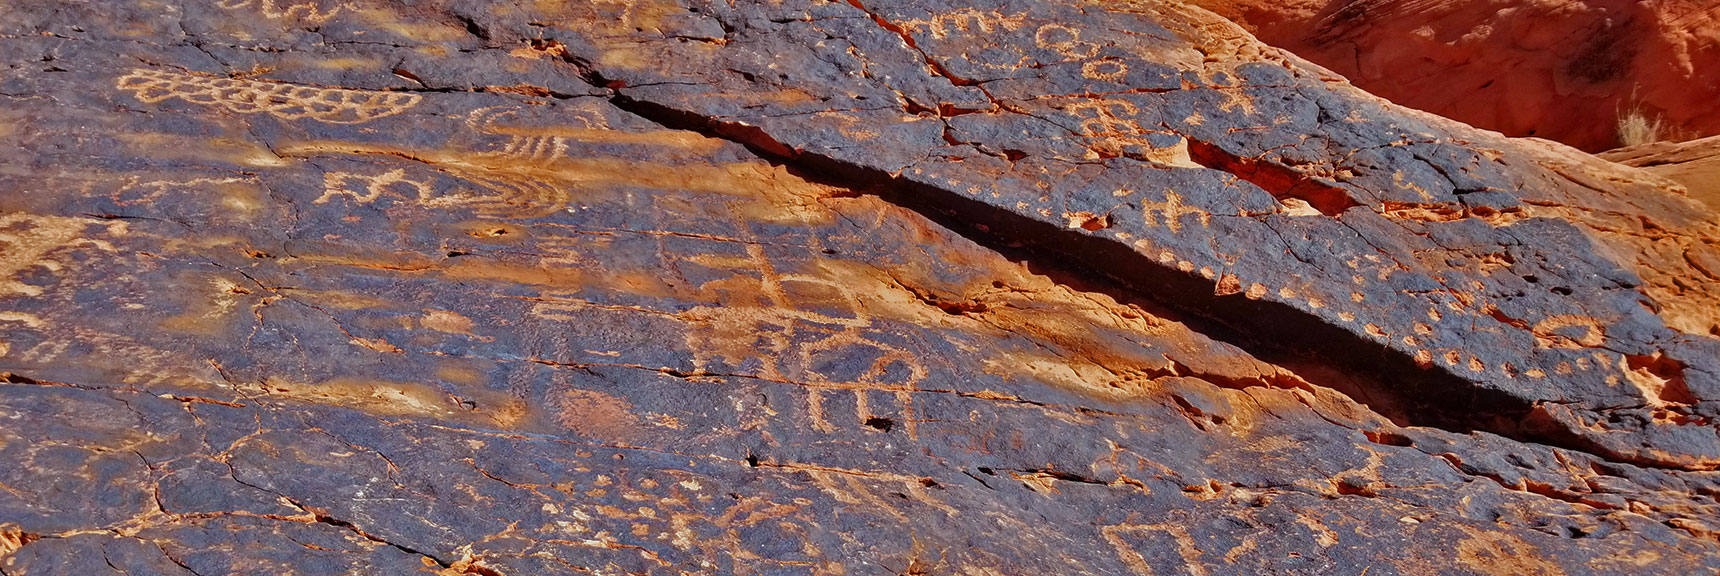 Petroglyphs on Mouse's Tank Trail in Valley of Fire State Park, Nevada, Slide 8